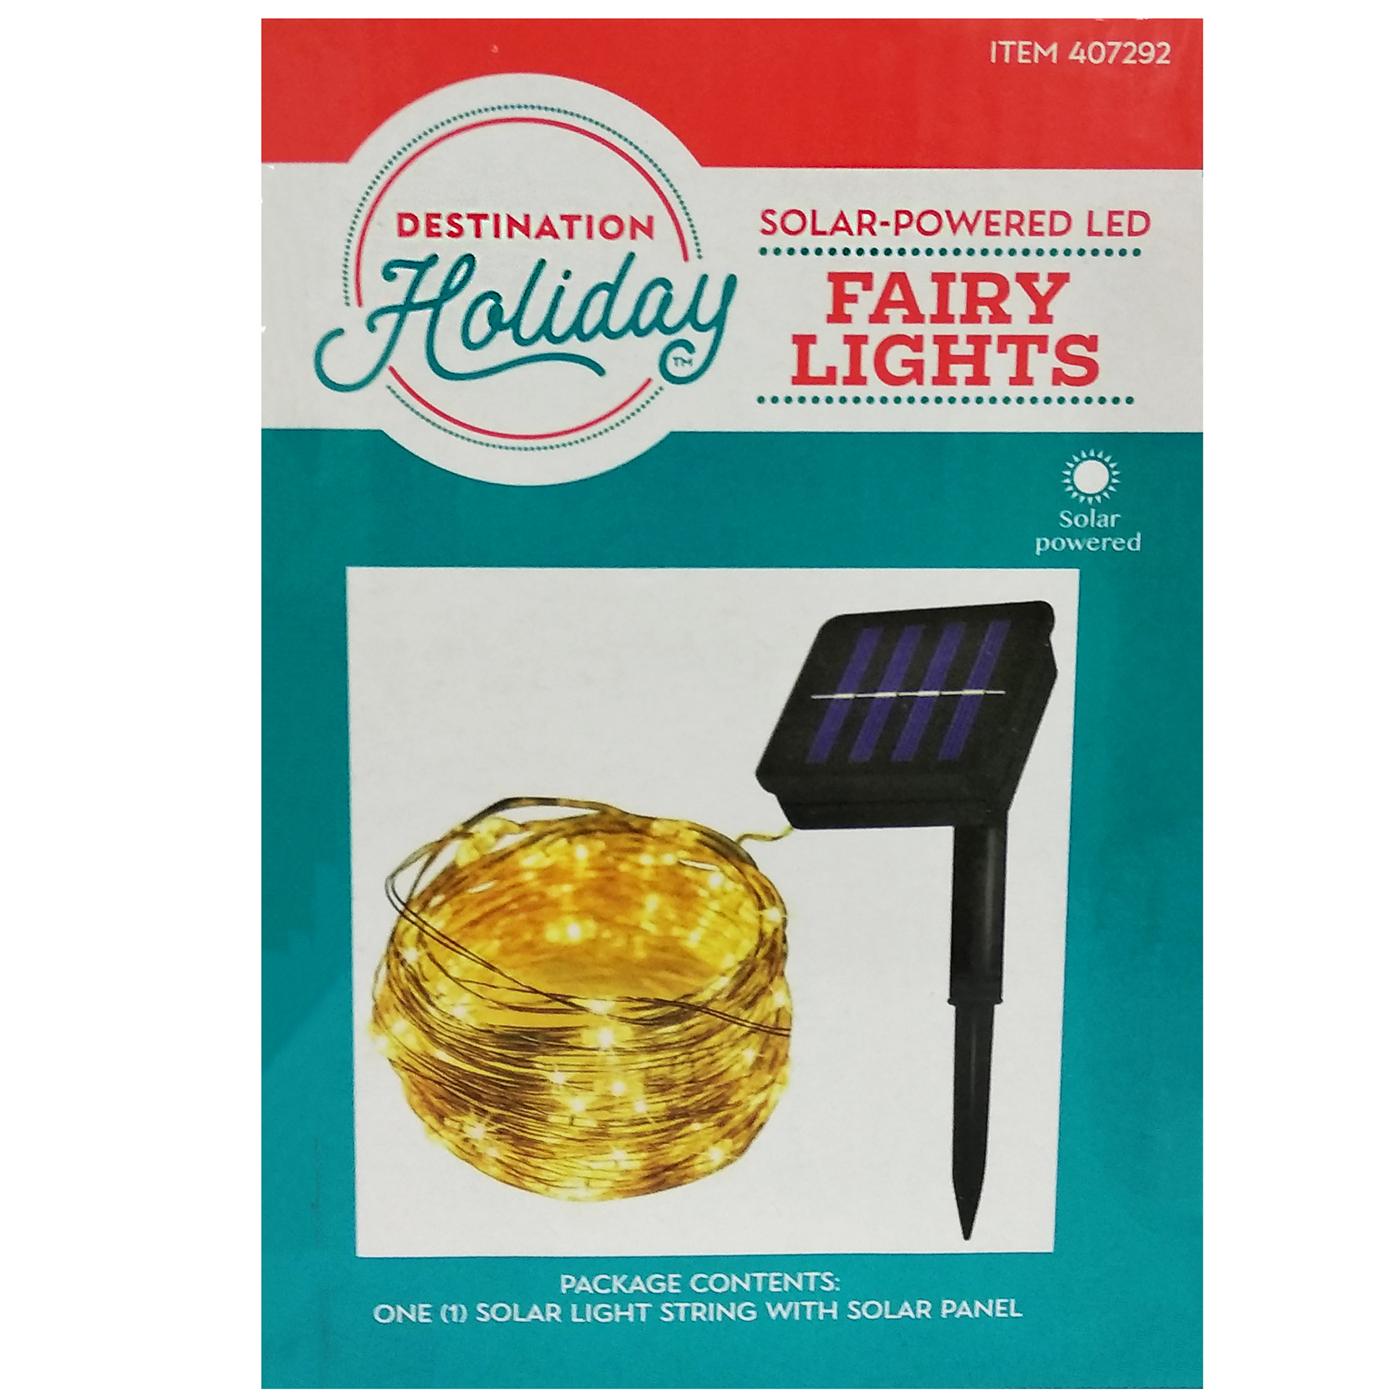 Destination Holiday Solar-Powered LED Fairy String Lights - Warm White; image 1 of 2